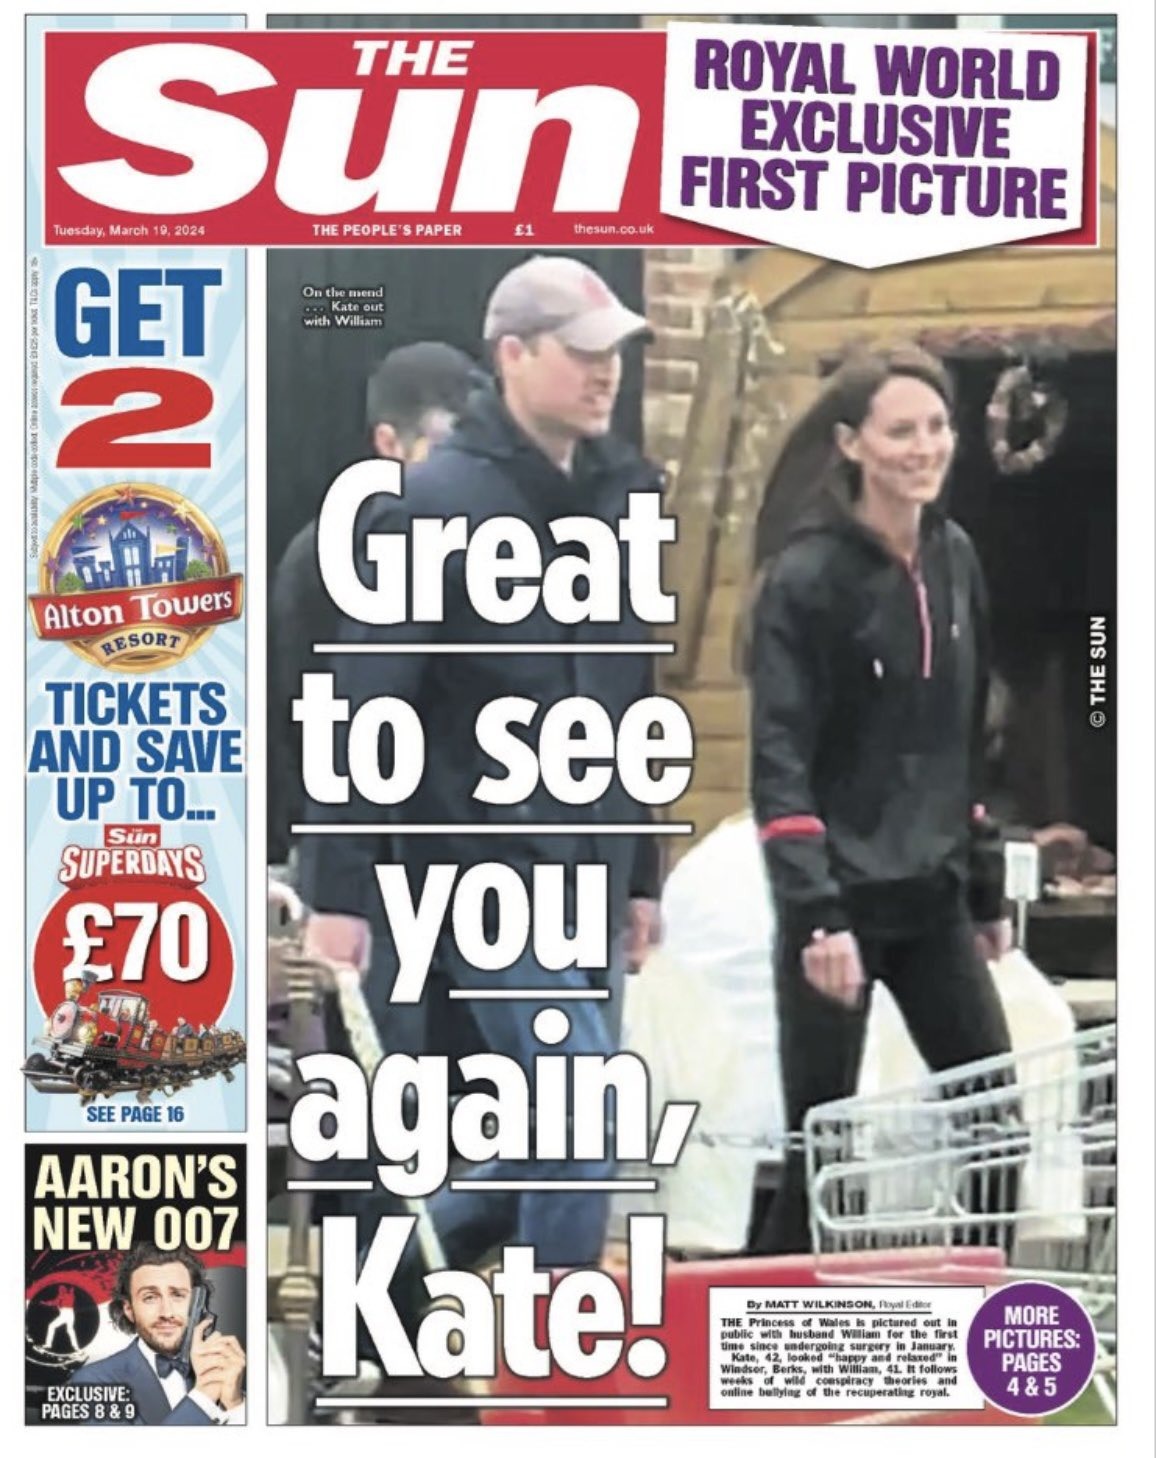 The Sun is suing ITV over the Princess Kate-Windsor Farm Store video